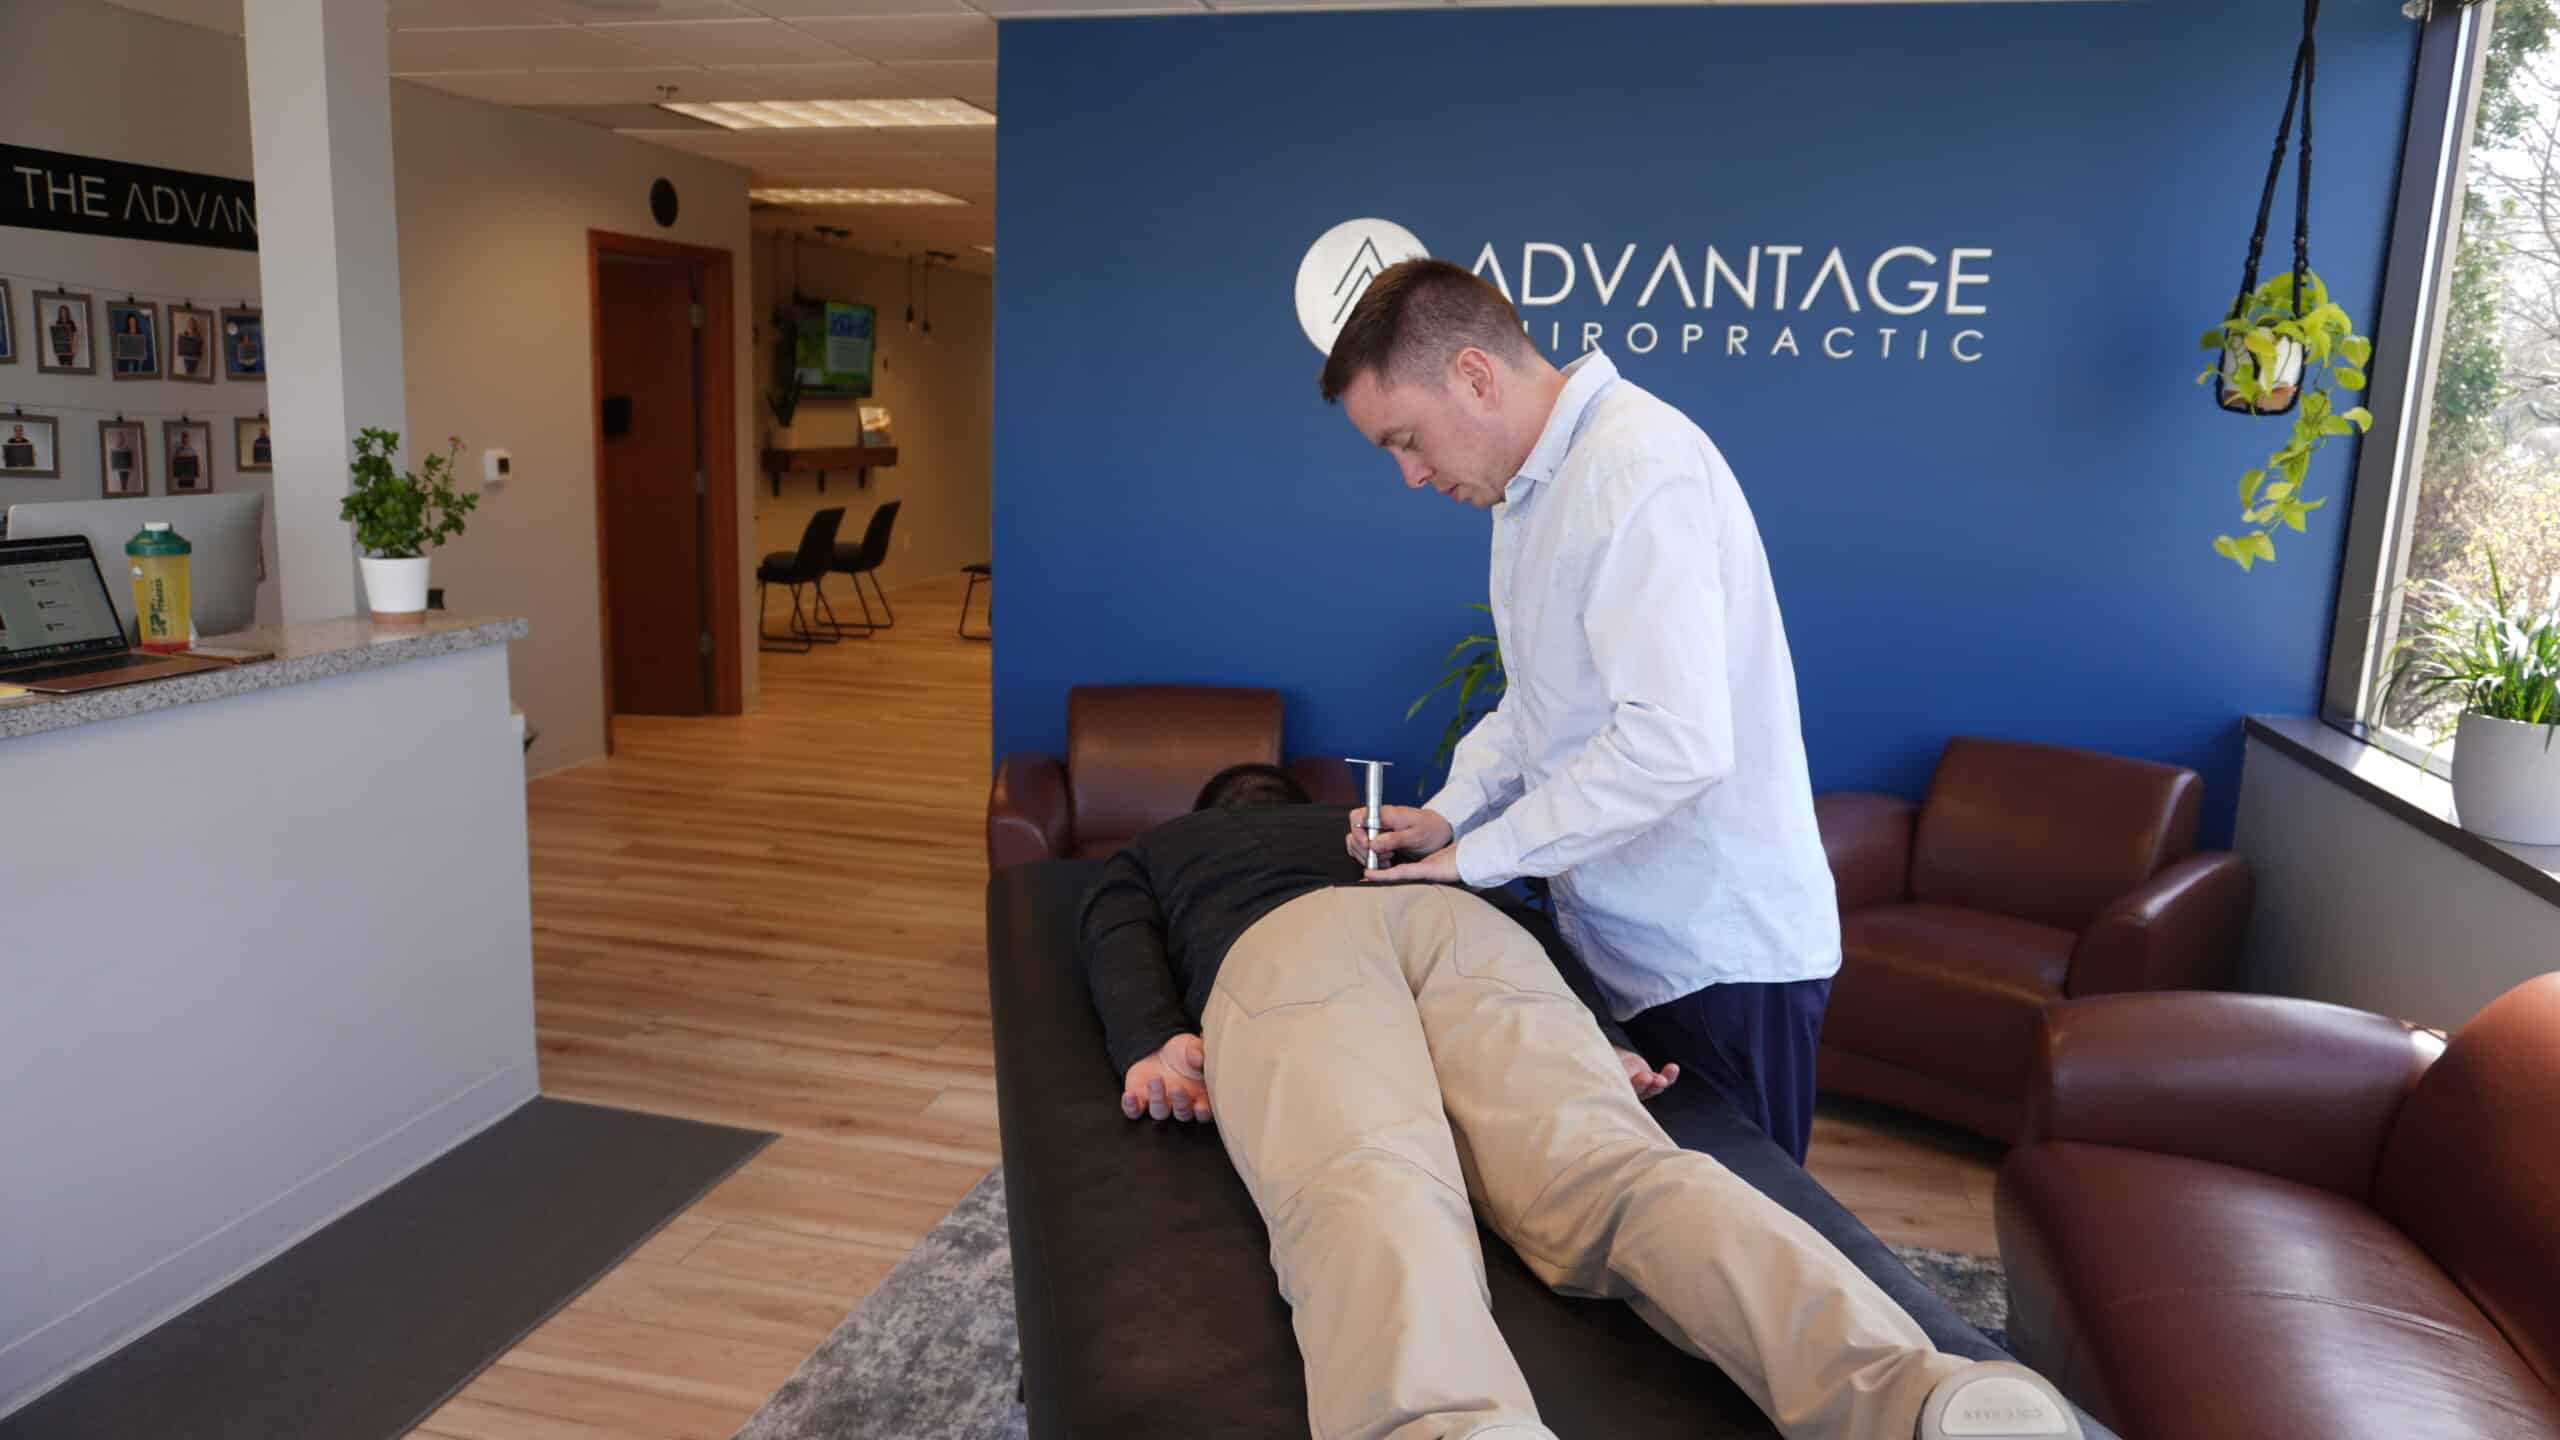 Advantage Chiropractic doctor adjust patient spine in their clinic near milwaukee wi